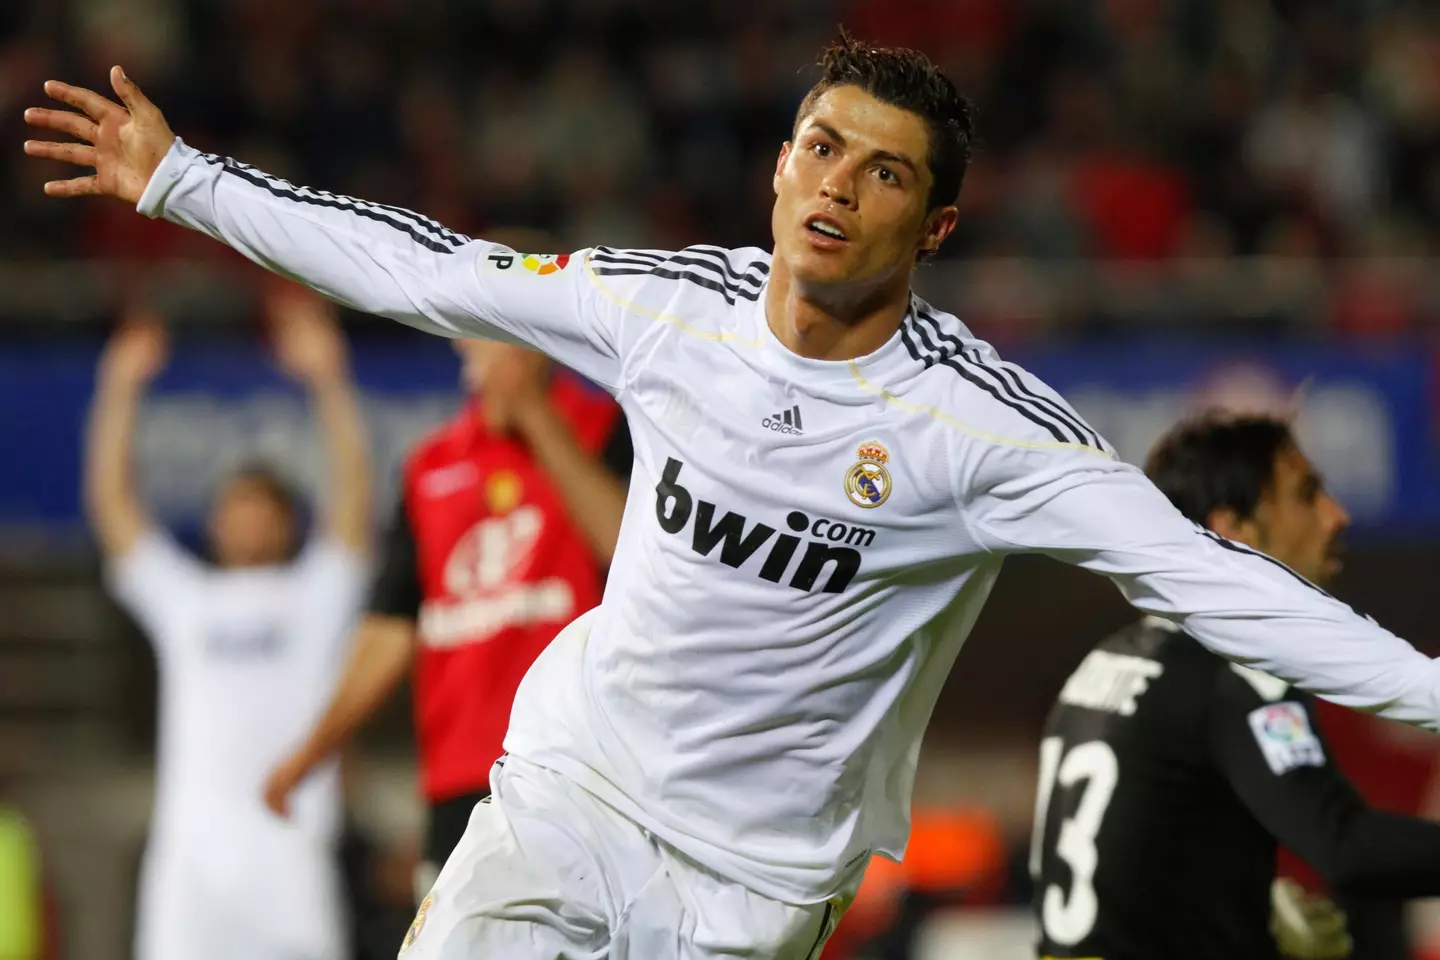 Ronaldo played for Atletico's rivals Real Madrid for nearly a decade (Image: Alamy)